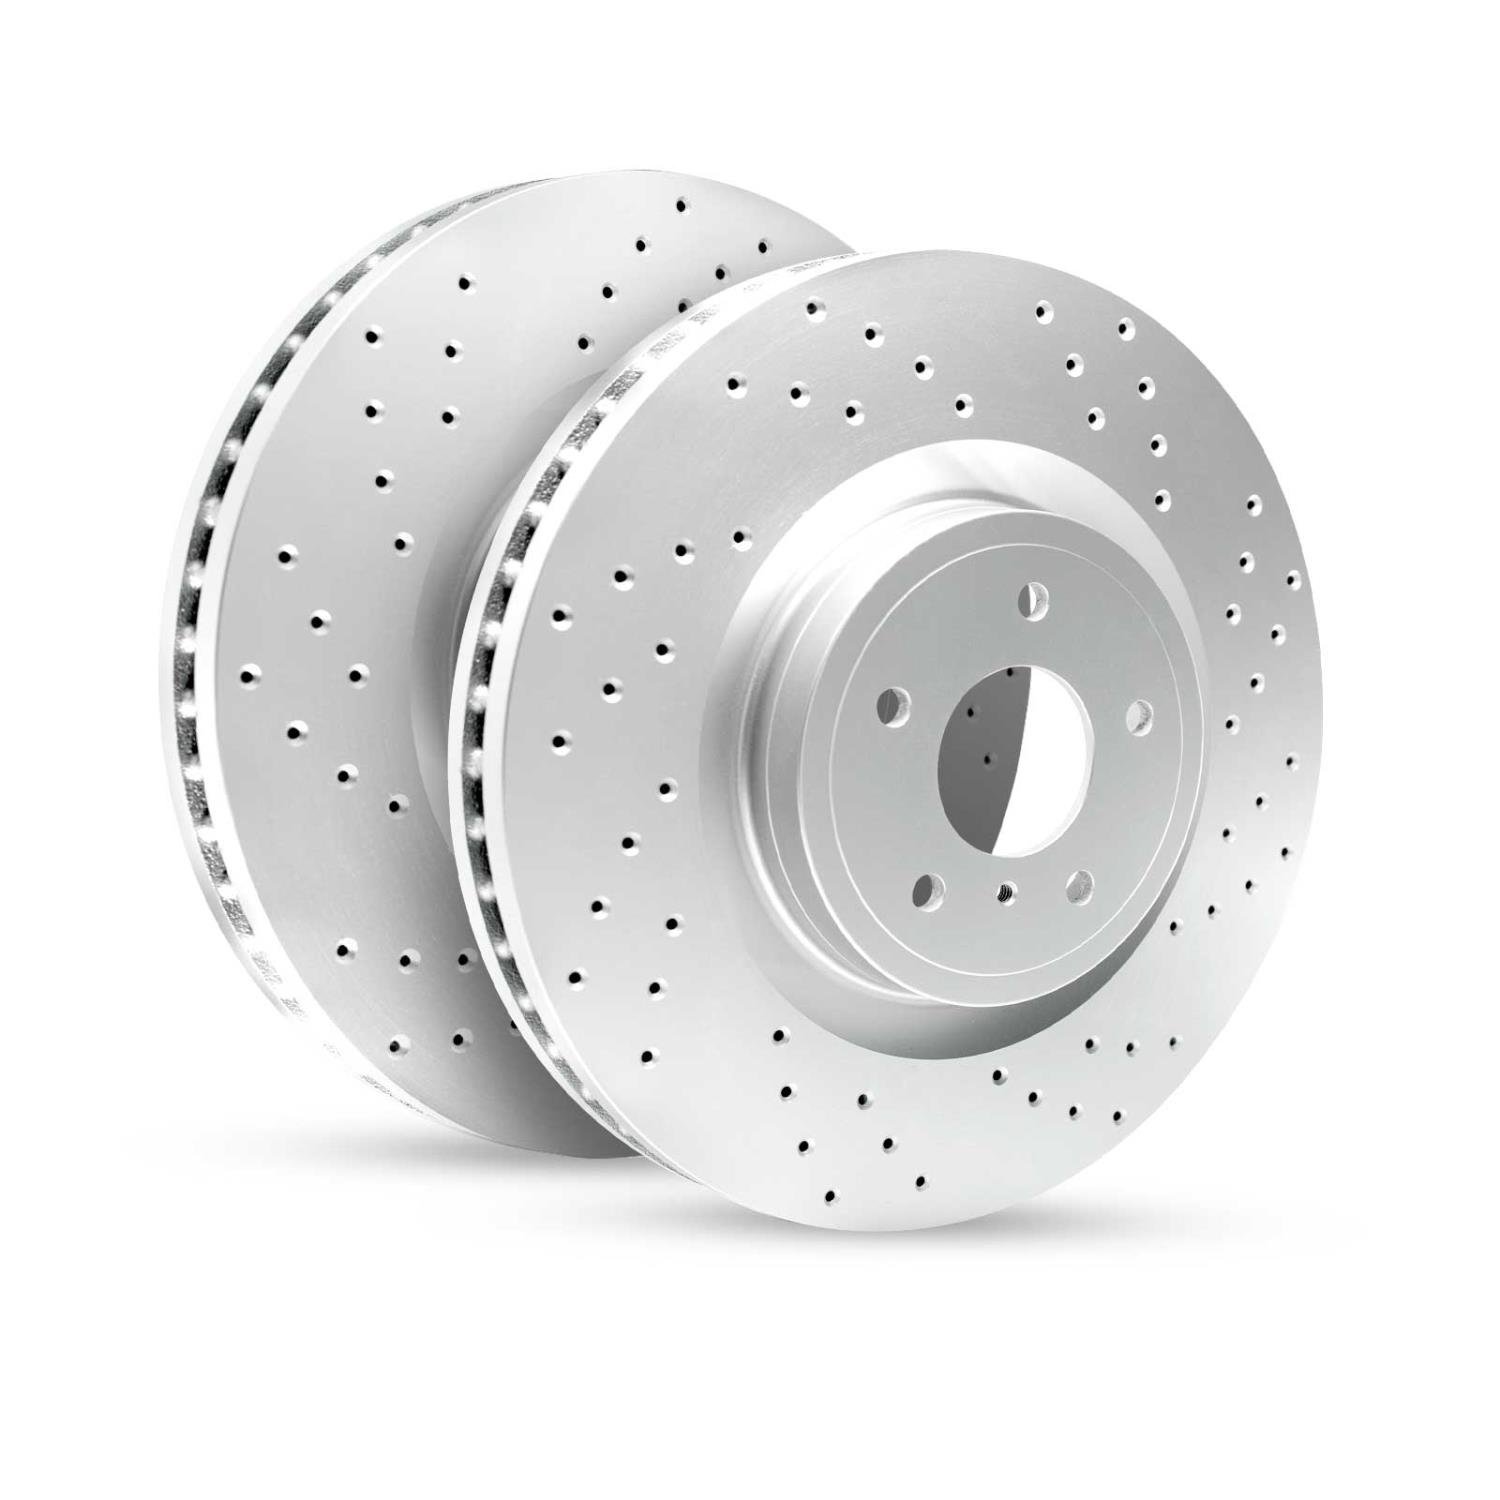 GEO-Carbon Drilled/Slotted Rotors, 2000-2004 Fits Multiple Makes/Models, Position: Rear